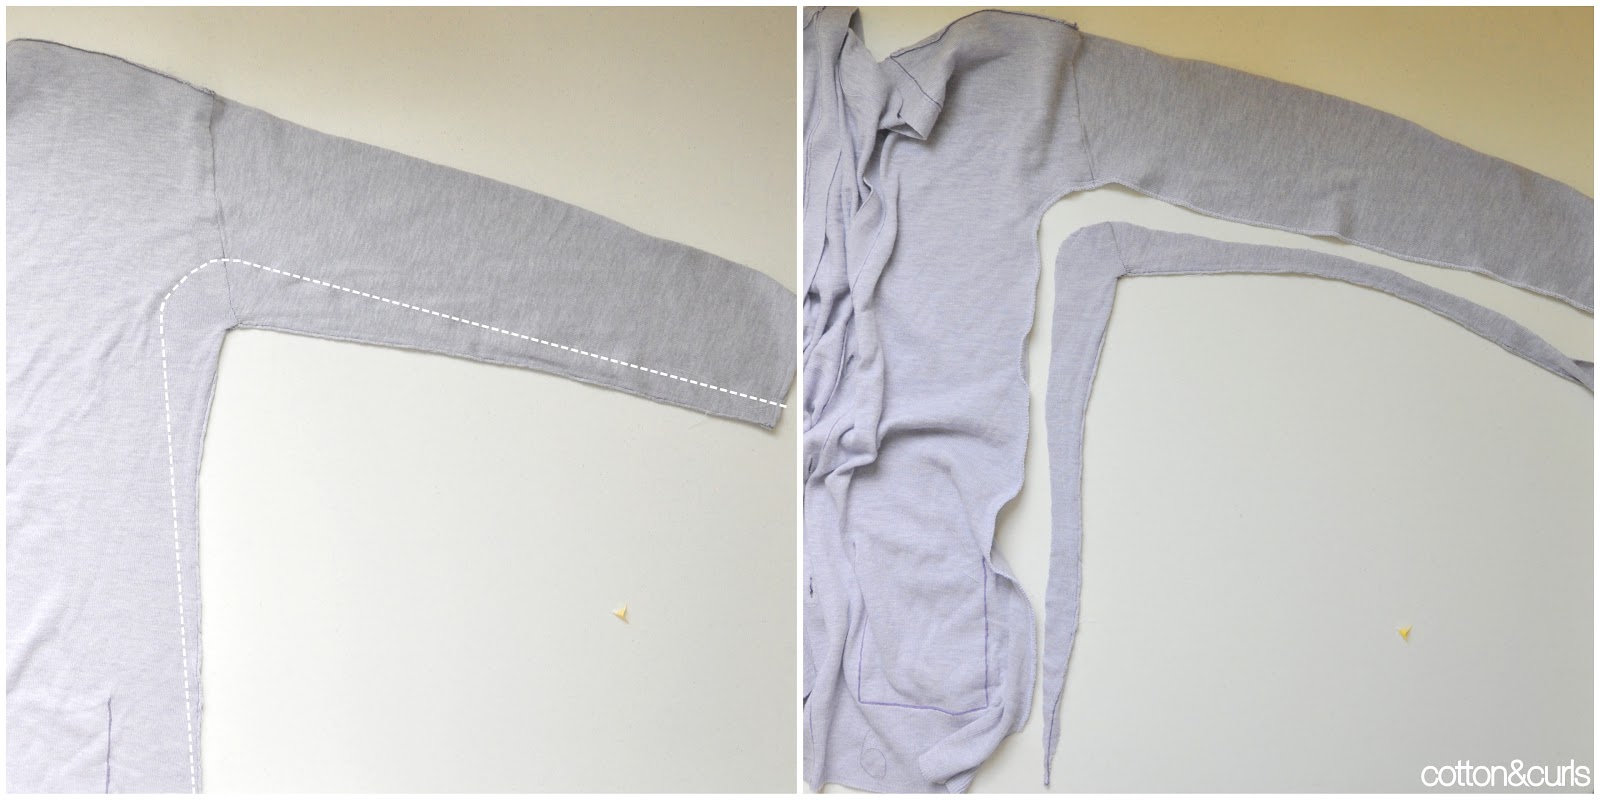 Turn an oversized sweater into a maternity top tutorial | DIY maternity